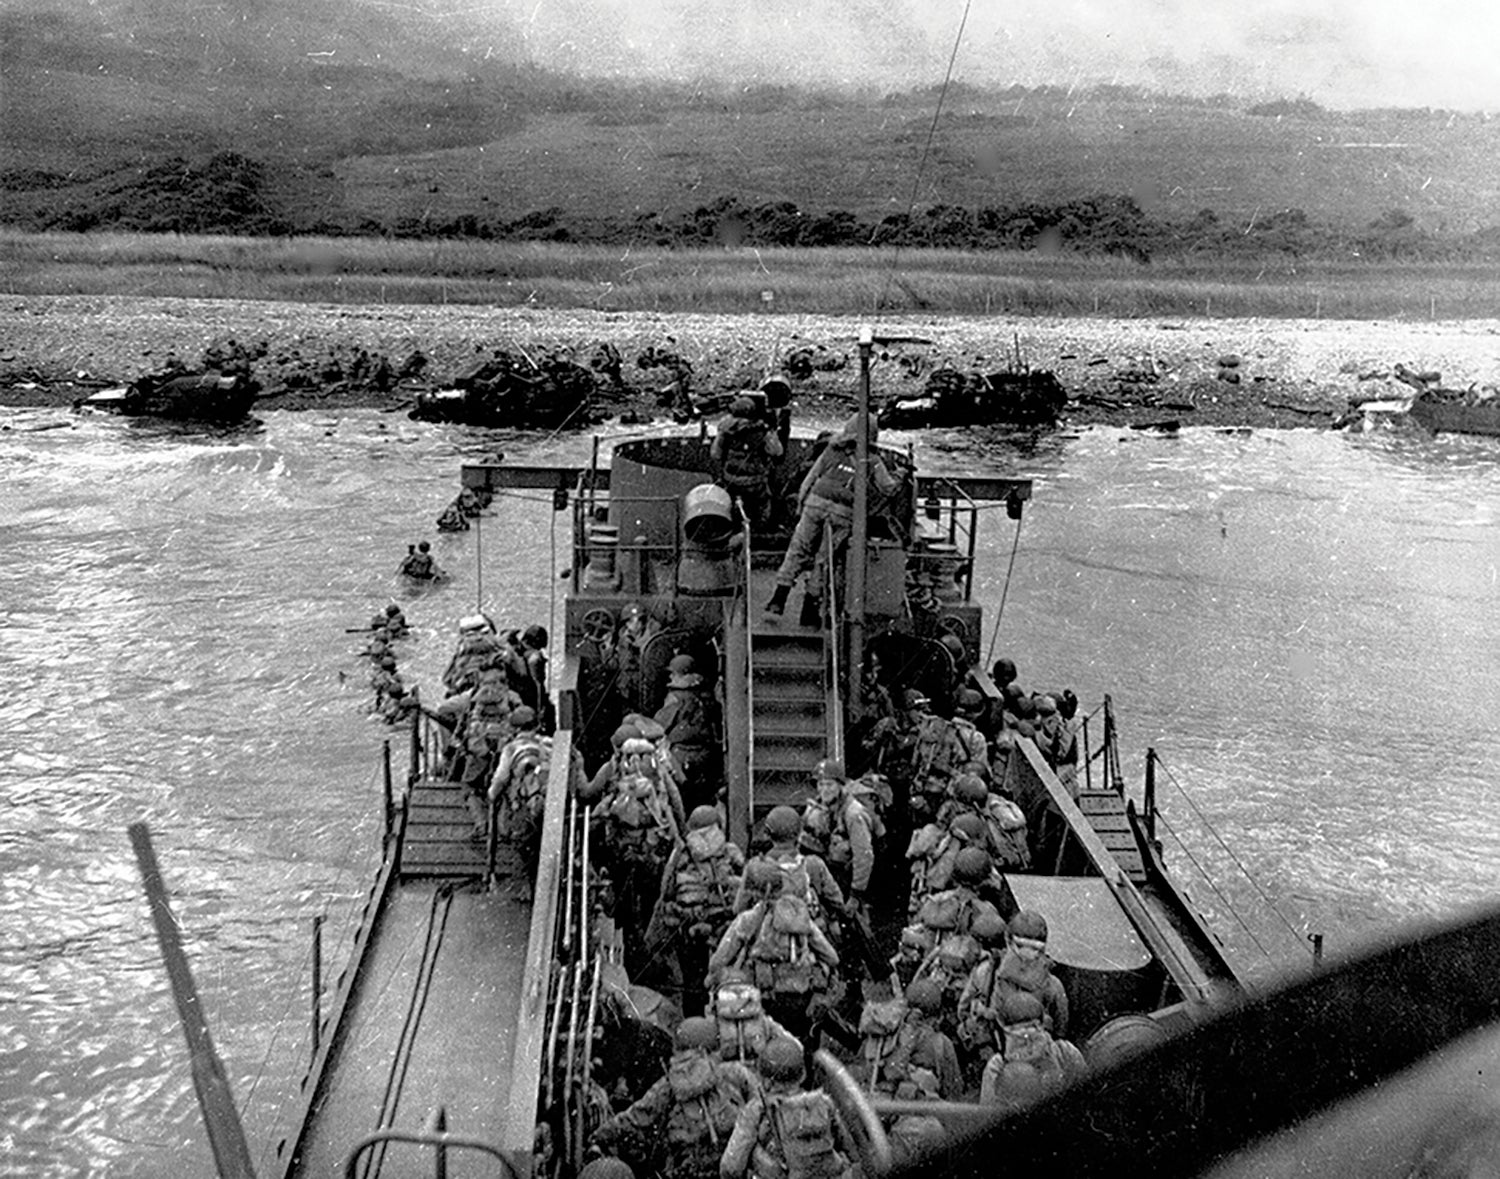 U.S. soldiers disembark from a landing craft at Omaha Beach, Normandy, on D-Day. (Credit: National Archives)